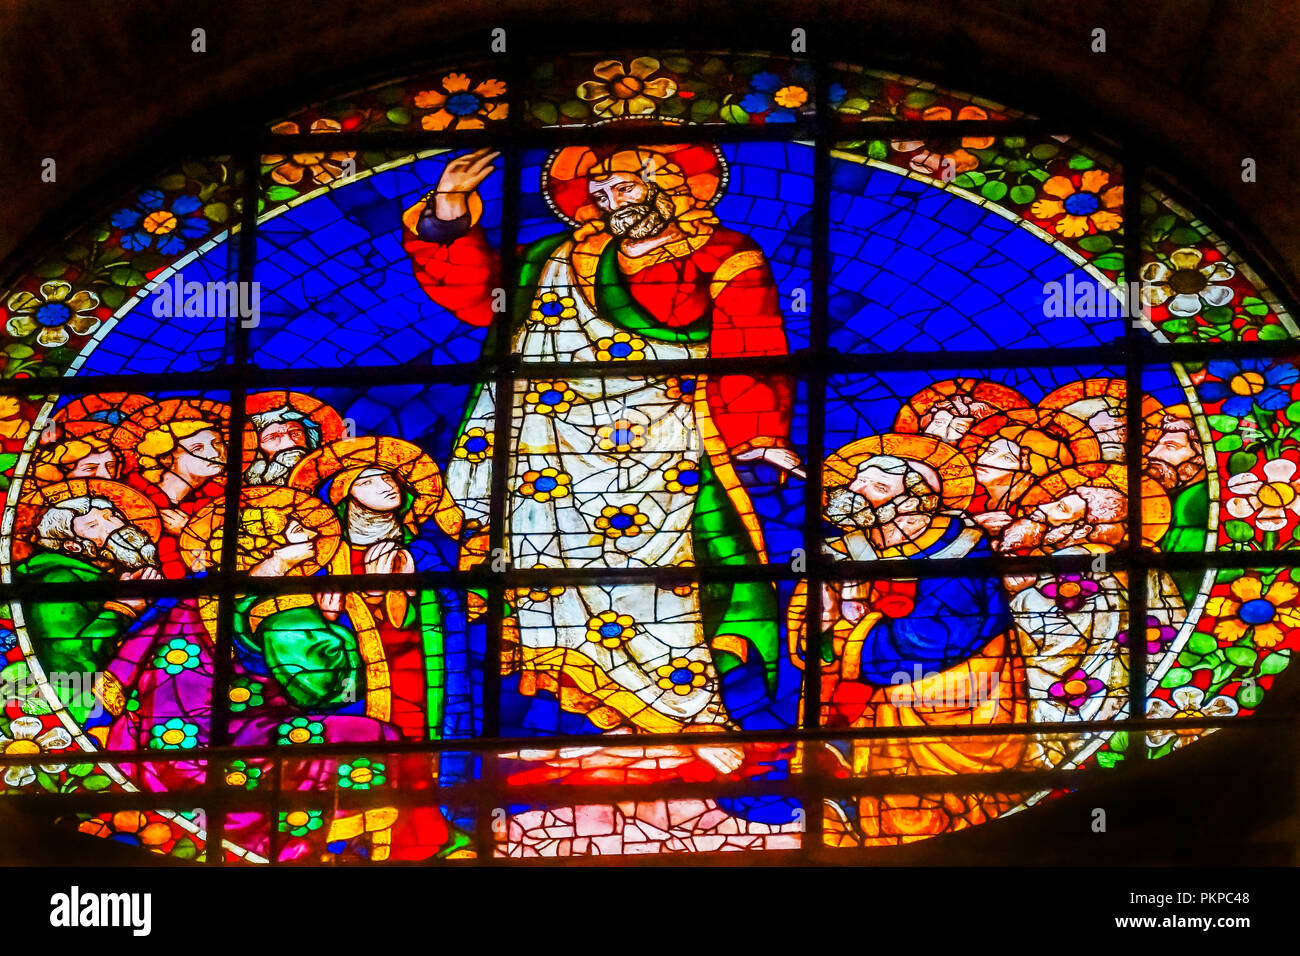 Jesus Christ Virgin Mary Disciples Stained Glass Duomo Cathedral Church Florence Italy. Stained glass ifrom 1400 to 1500s. Stock Photo